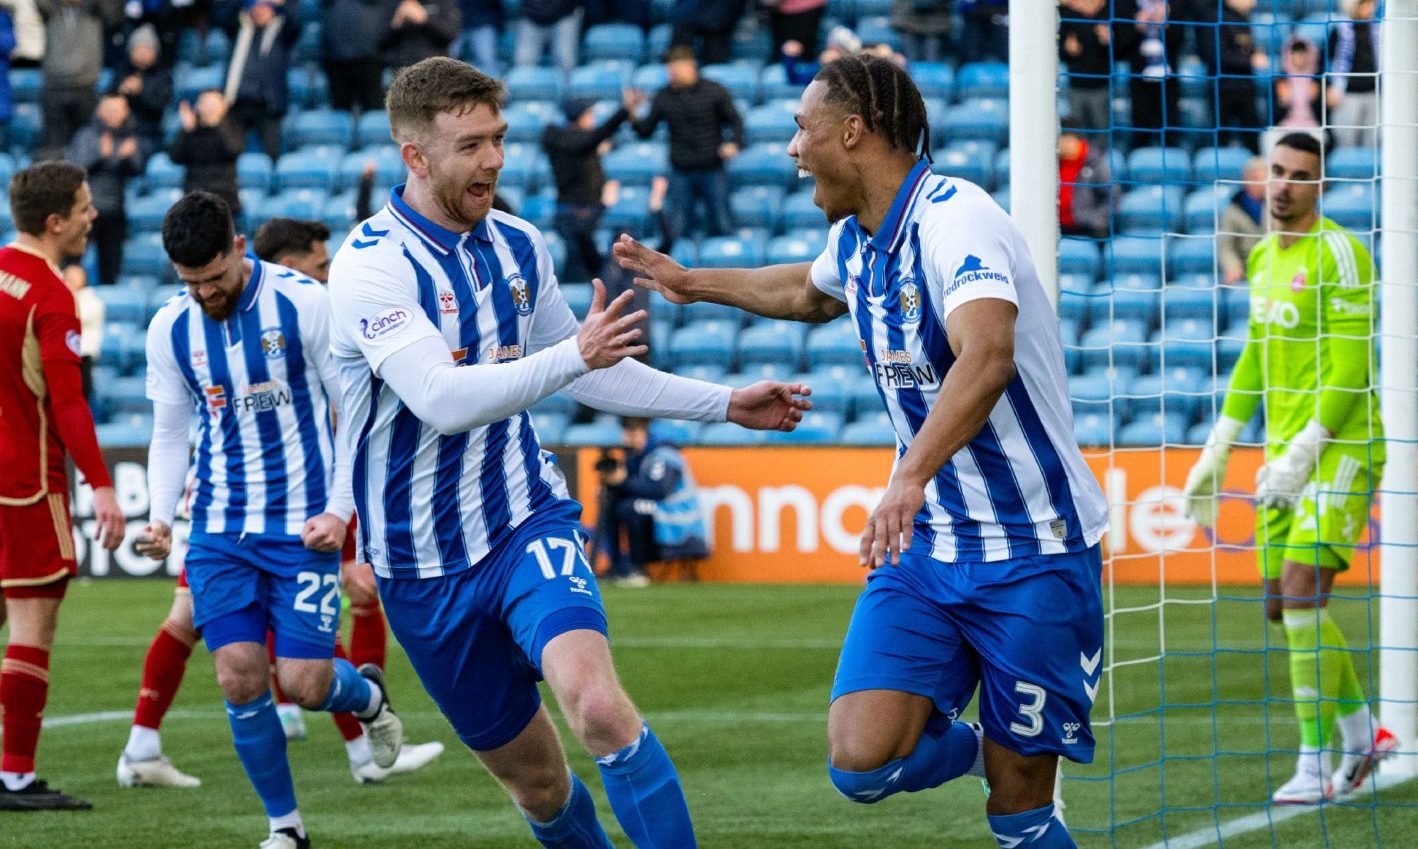 Kilmarnock's Corrie Ndaba celebrates with Stuart Findlay after scoring to make it 1-0 during a cinch Premiership match between Kilmarnock and Aberdeen at Rugby Park, on February 24, 2024, in Kilmarnock, Scotland.